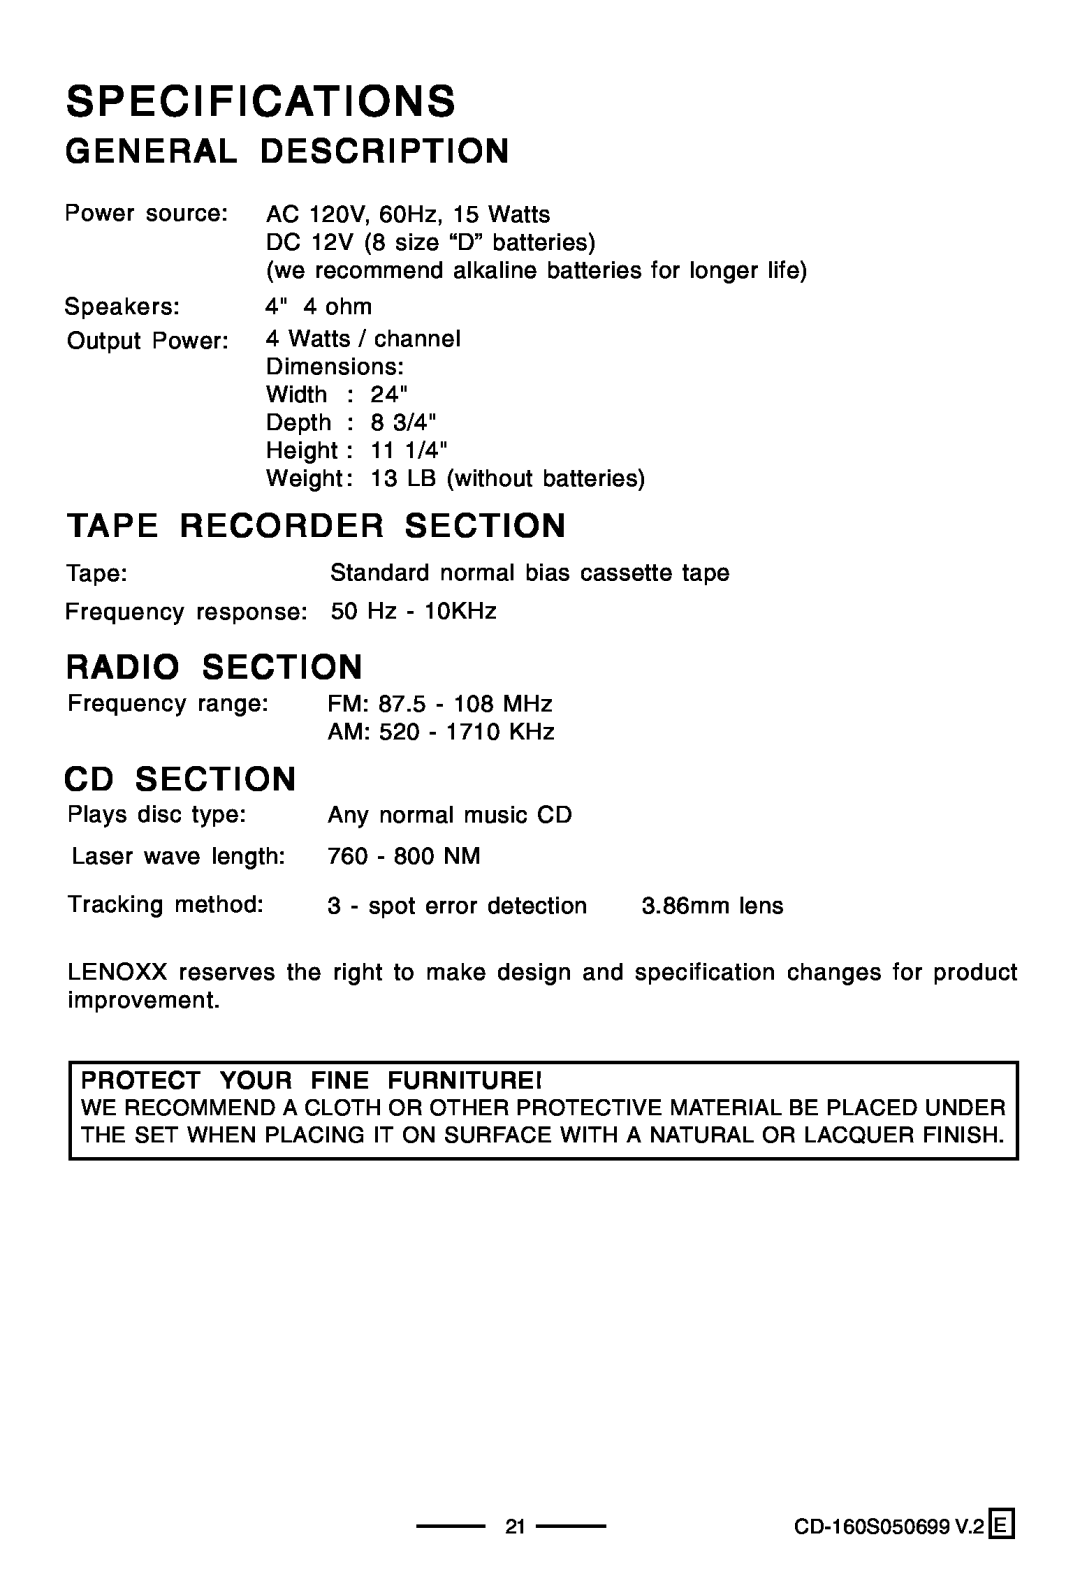 Lenoxx Electronics CD-160 manual Specifications, General Description, Tape Recorder Section, Radio Section, Cd Section 